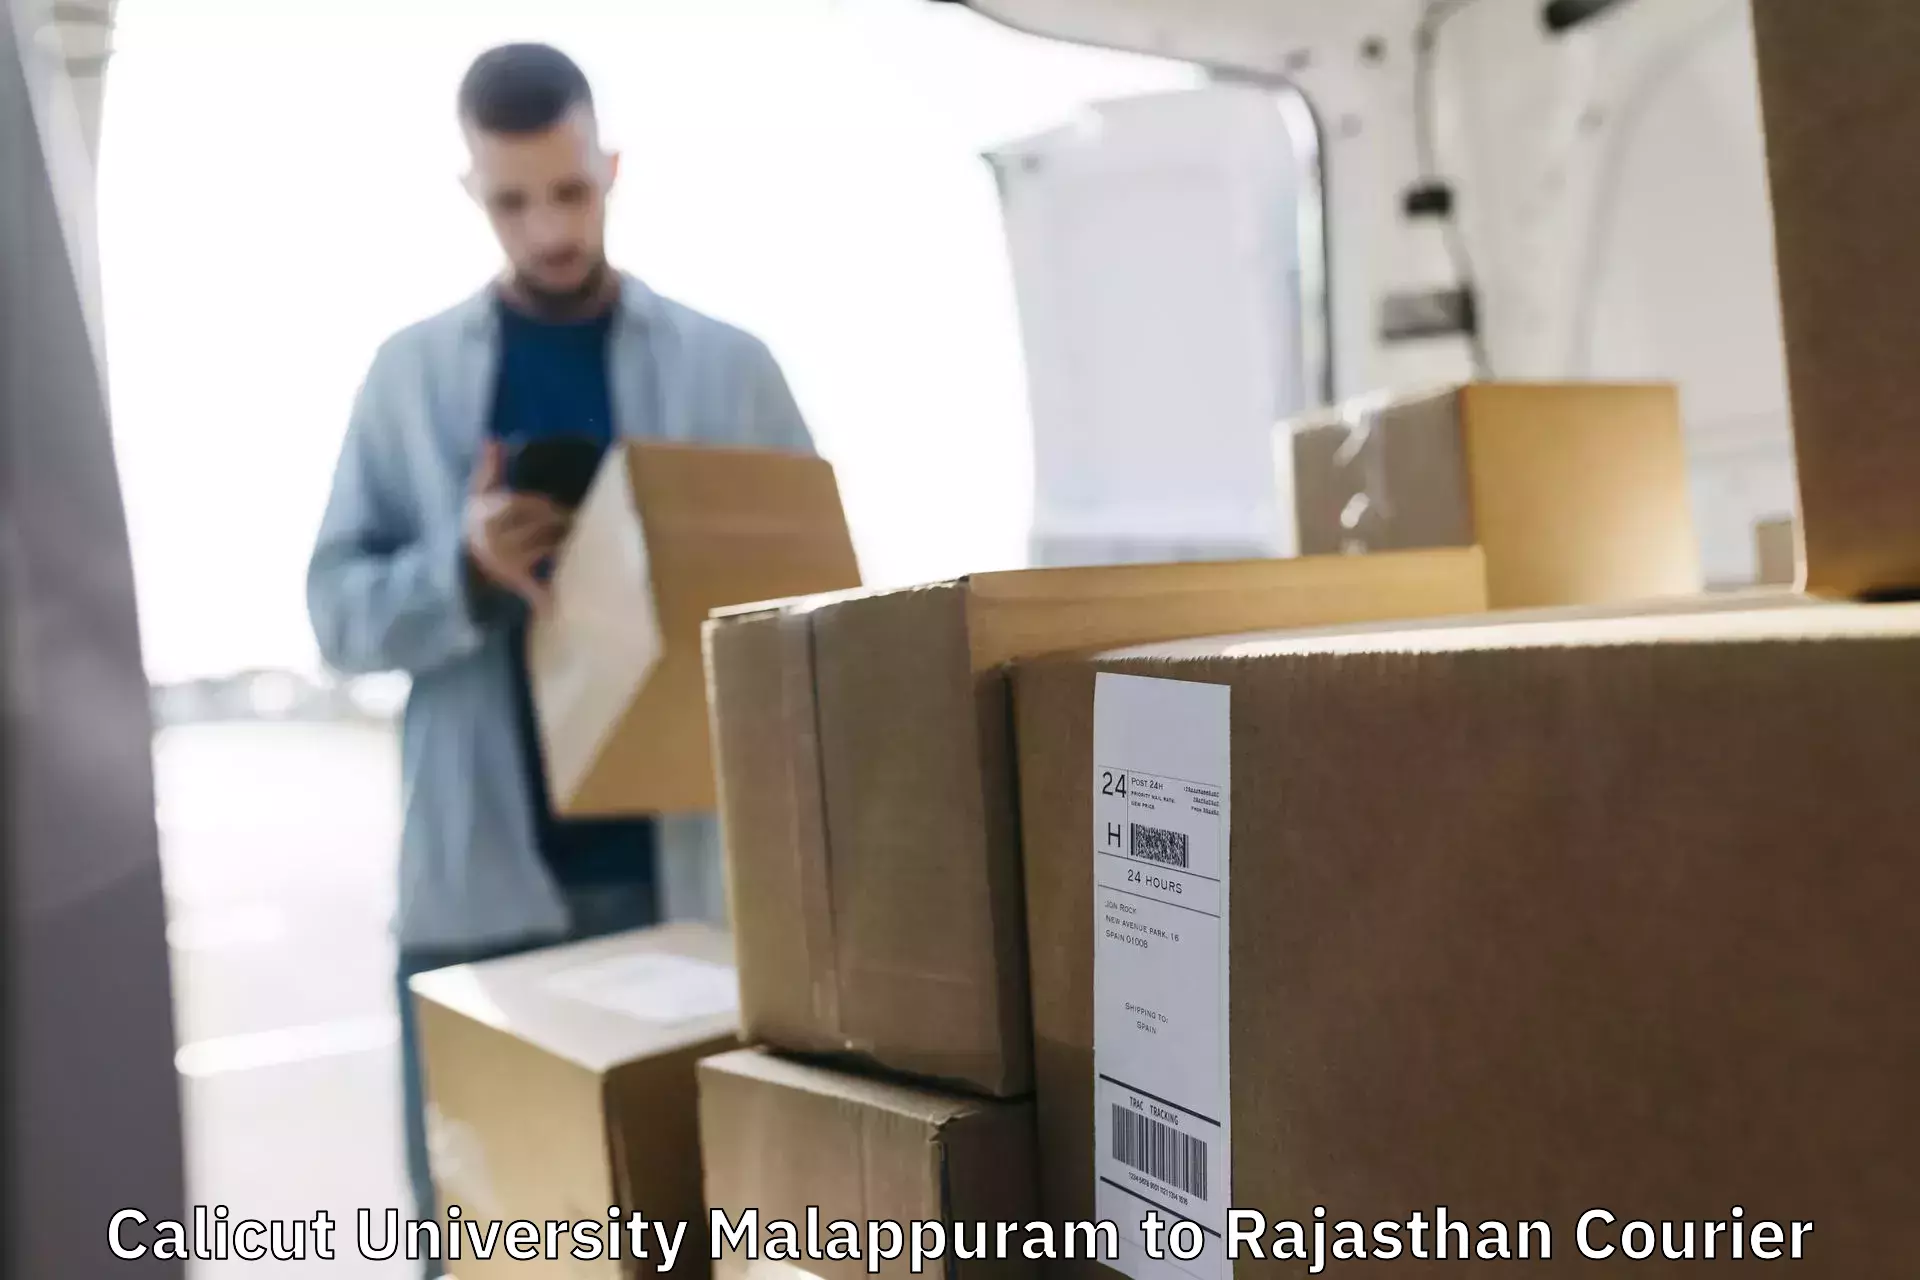 Personal courier services in Calicut University Malappuram to Udaipurwati